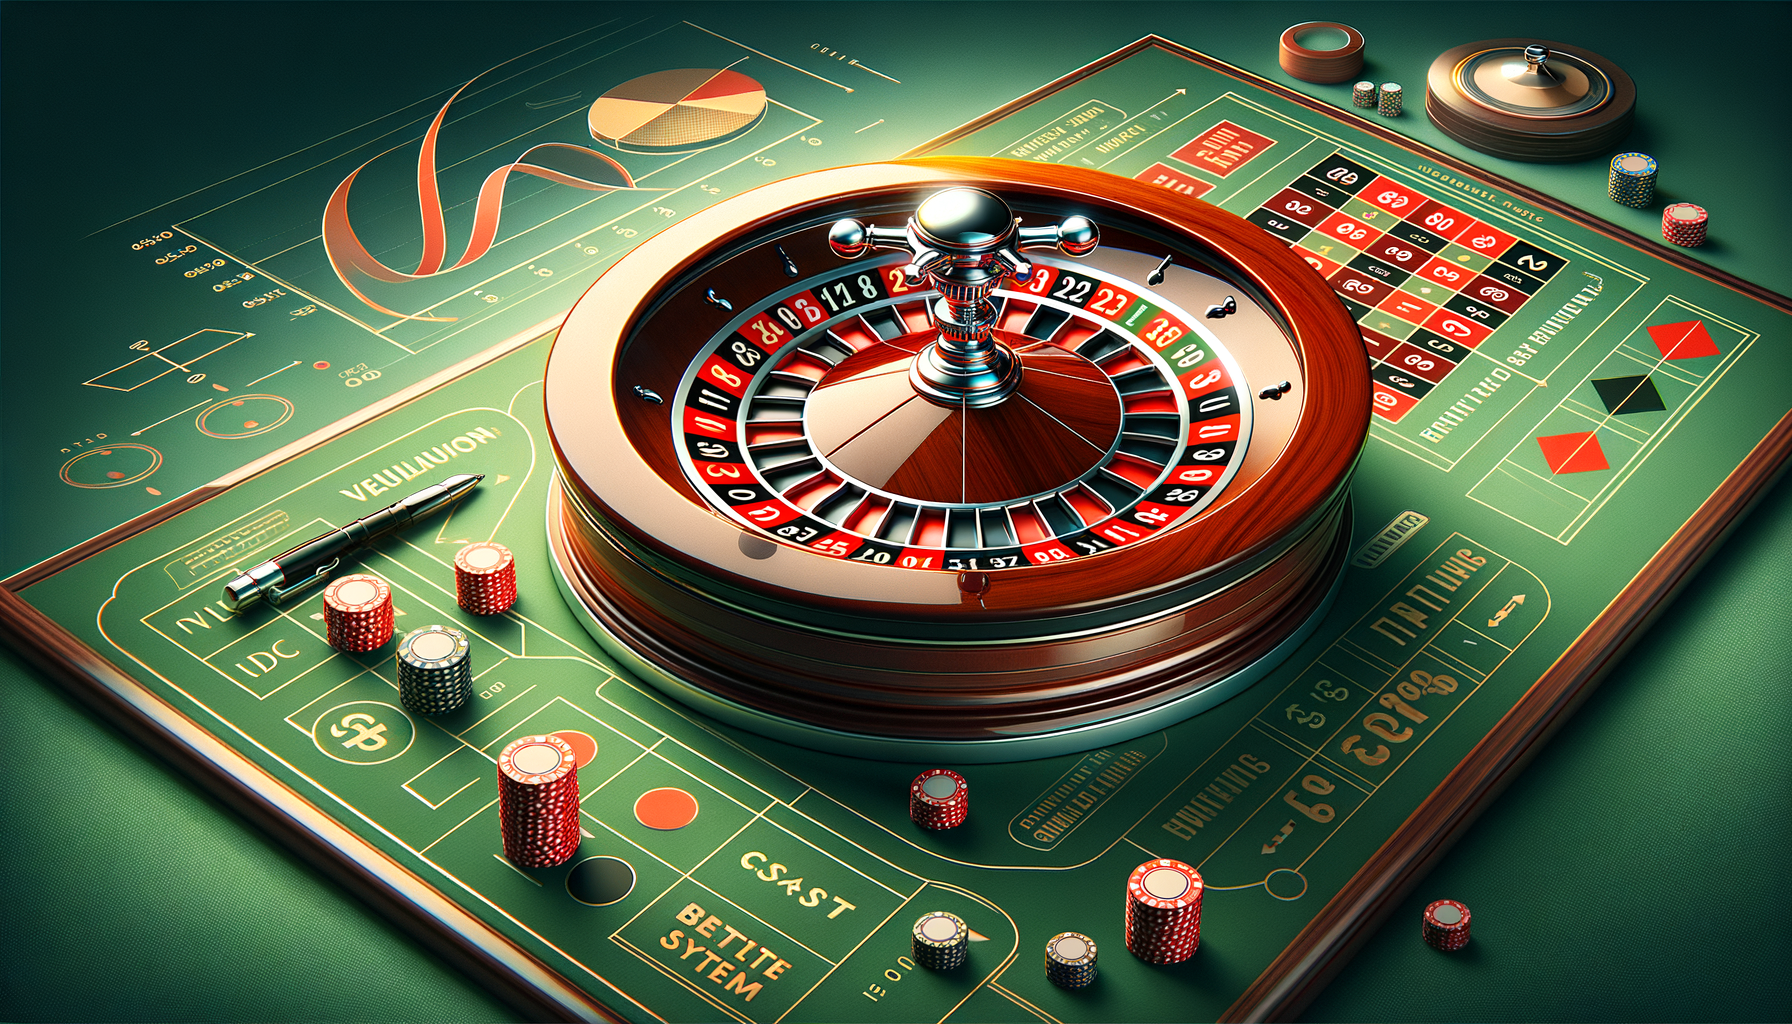 Bally’s Betting System: Evaluating Roulette Tactics